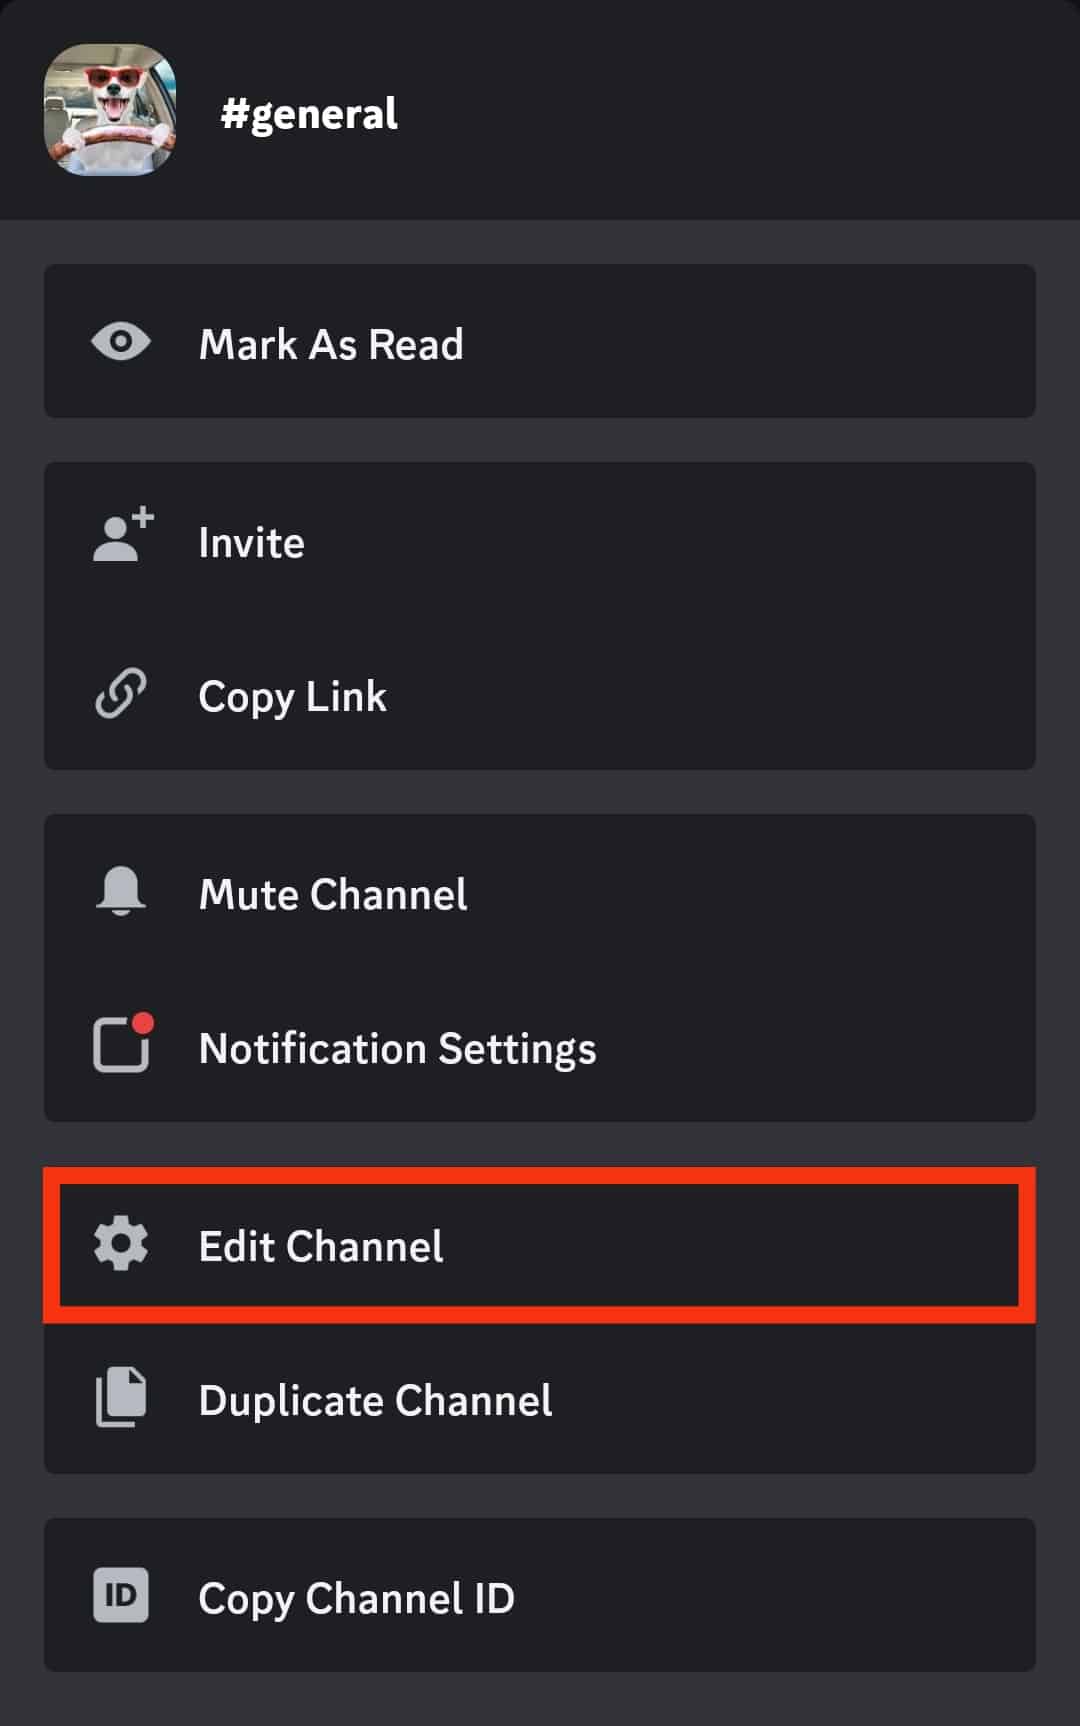 Click On The Edit Channel Option